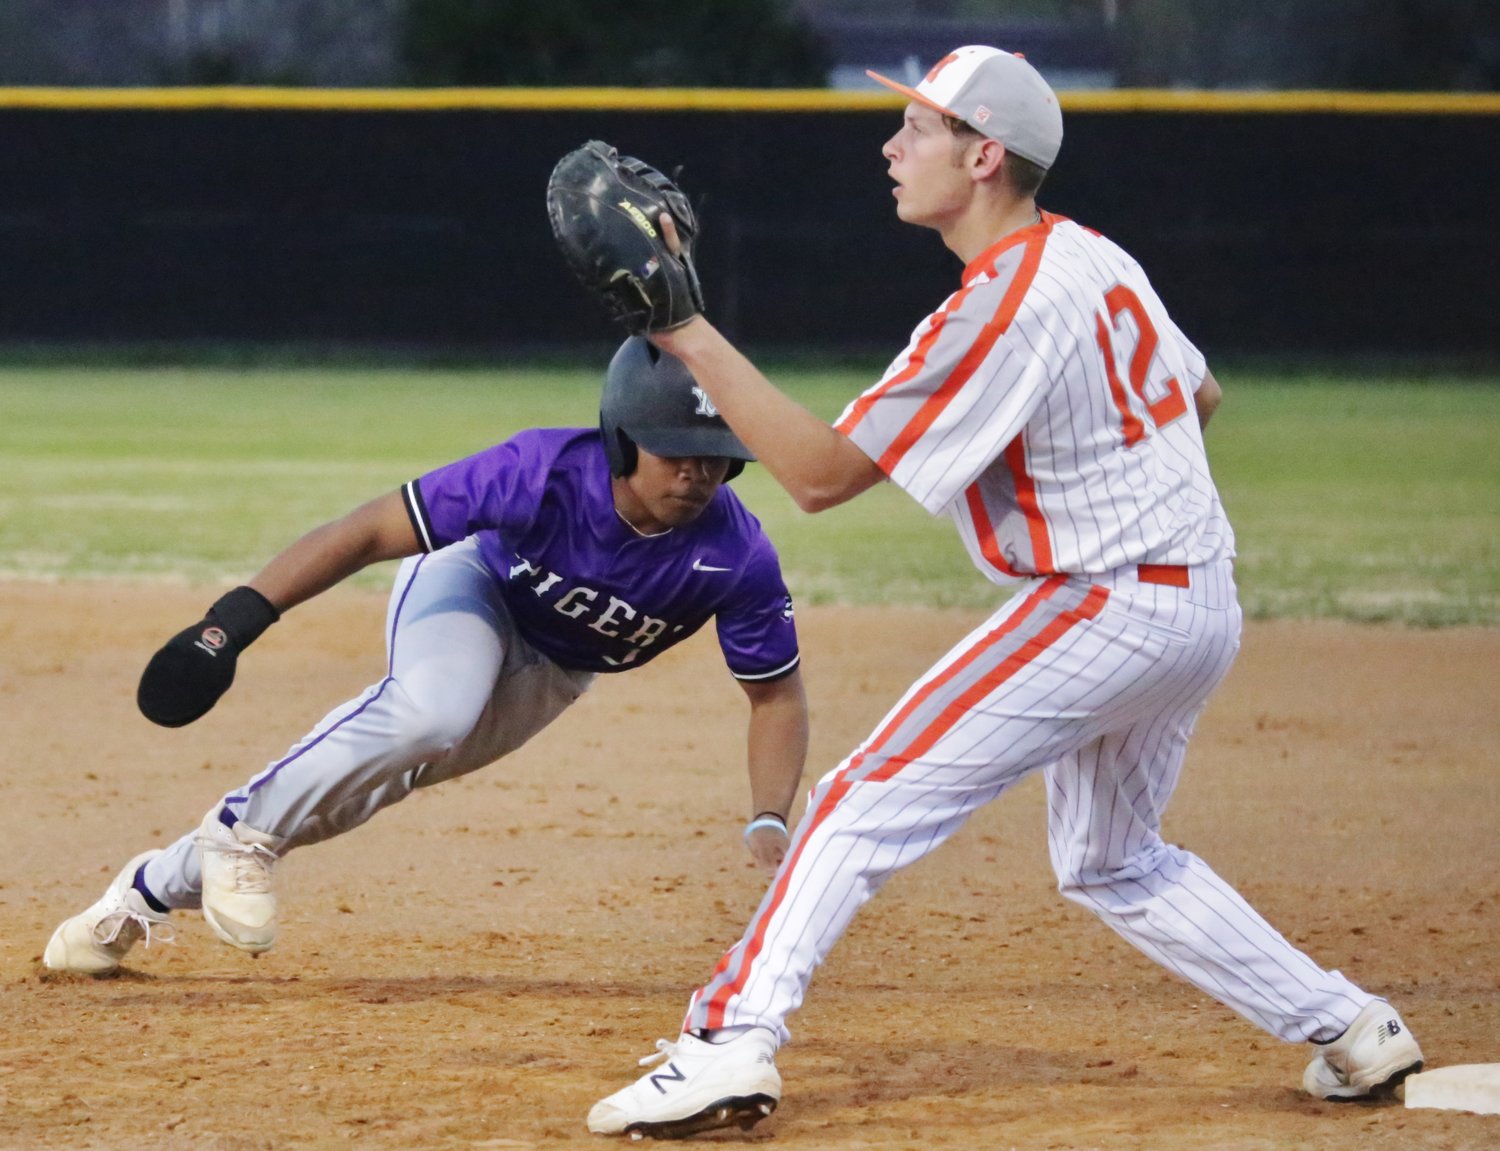 Kaden Bell picks off a Mt Vernon base runner at first base to close the top of the third inning last Friday. First baseman Jacob Castleberry made a smooth tag on a great throw for the out.